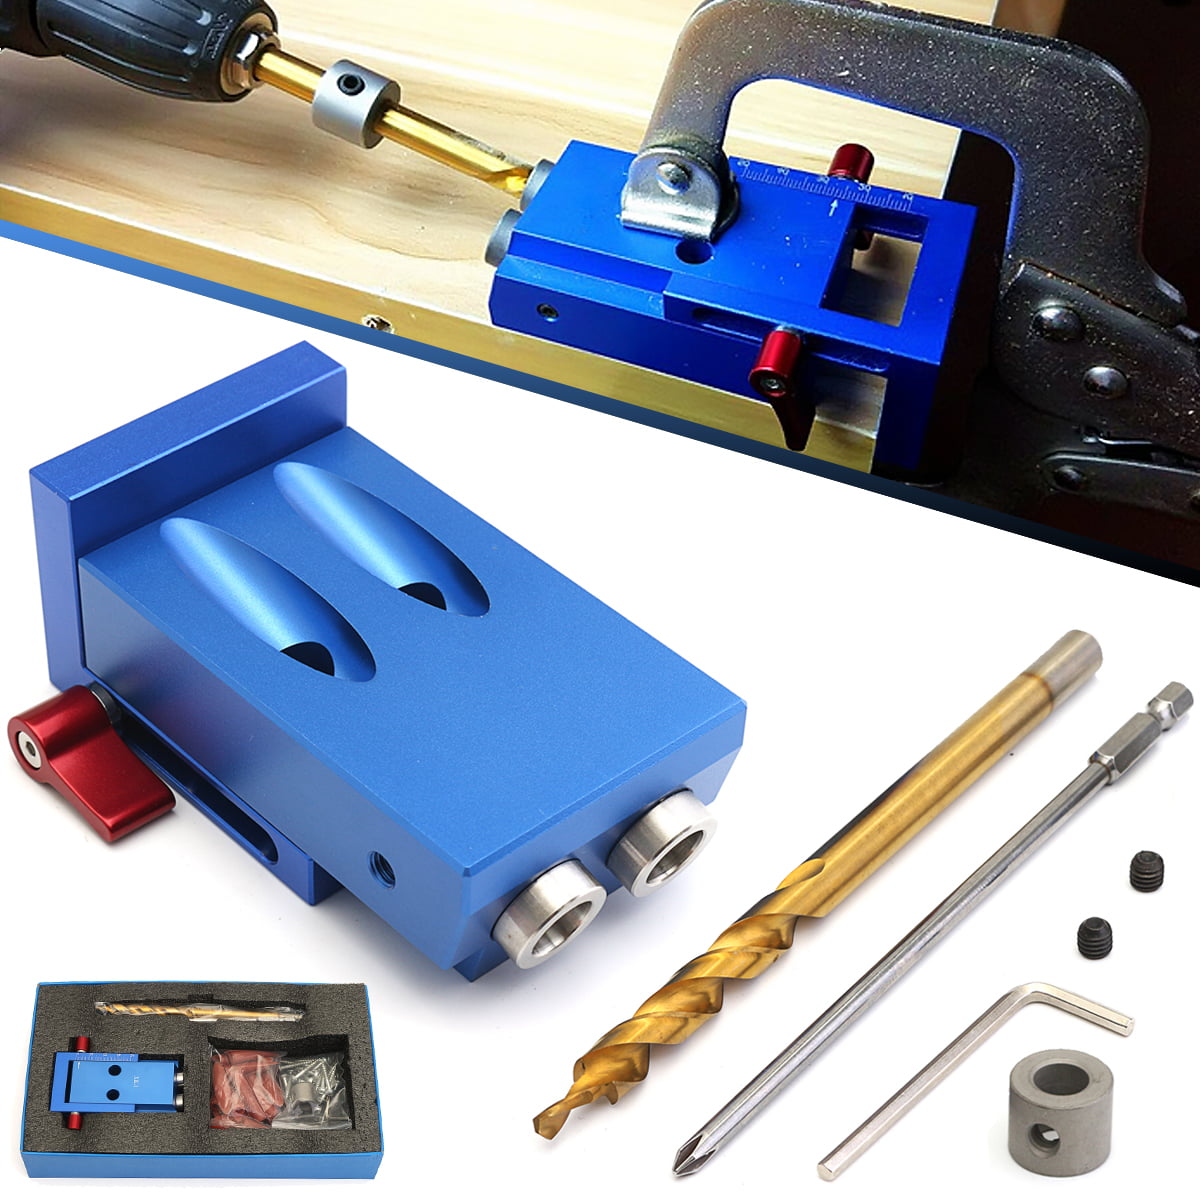 Pocket Hole Jig Kit System Wood Working Joinery Tool Set w/ Step Drill Bit 9.5mm 